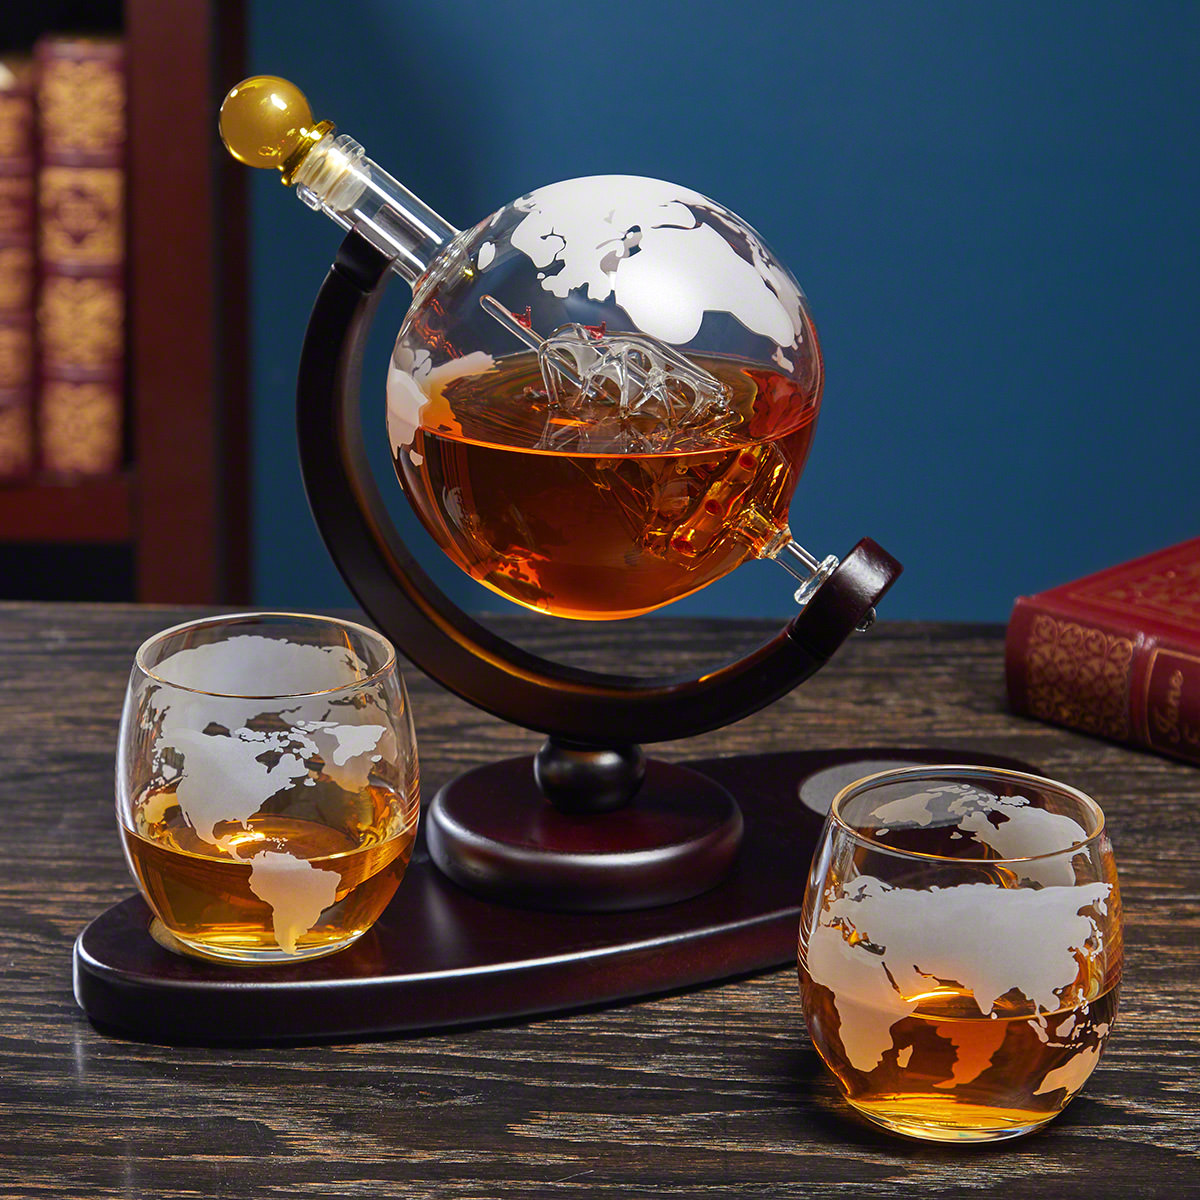 Brandy Bourbon Whiskey Decanter Sets Globe Decanter for Alcohol Scotch Vodka Newest Large Etched Globe Decanter for Men and Women with Wood Base Personalized Set with 4 Glasses for Liquor 